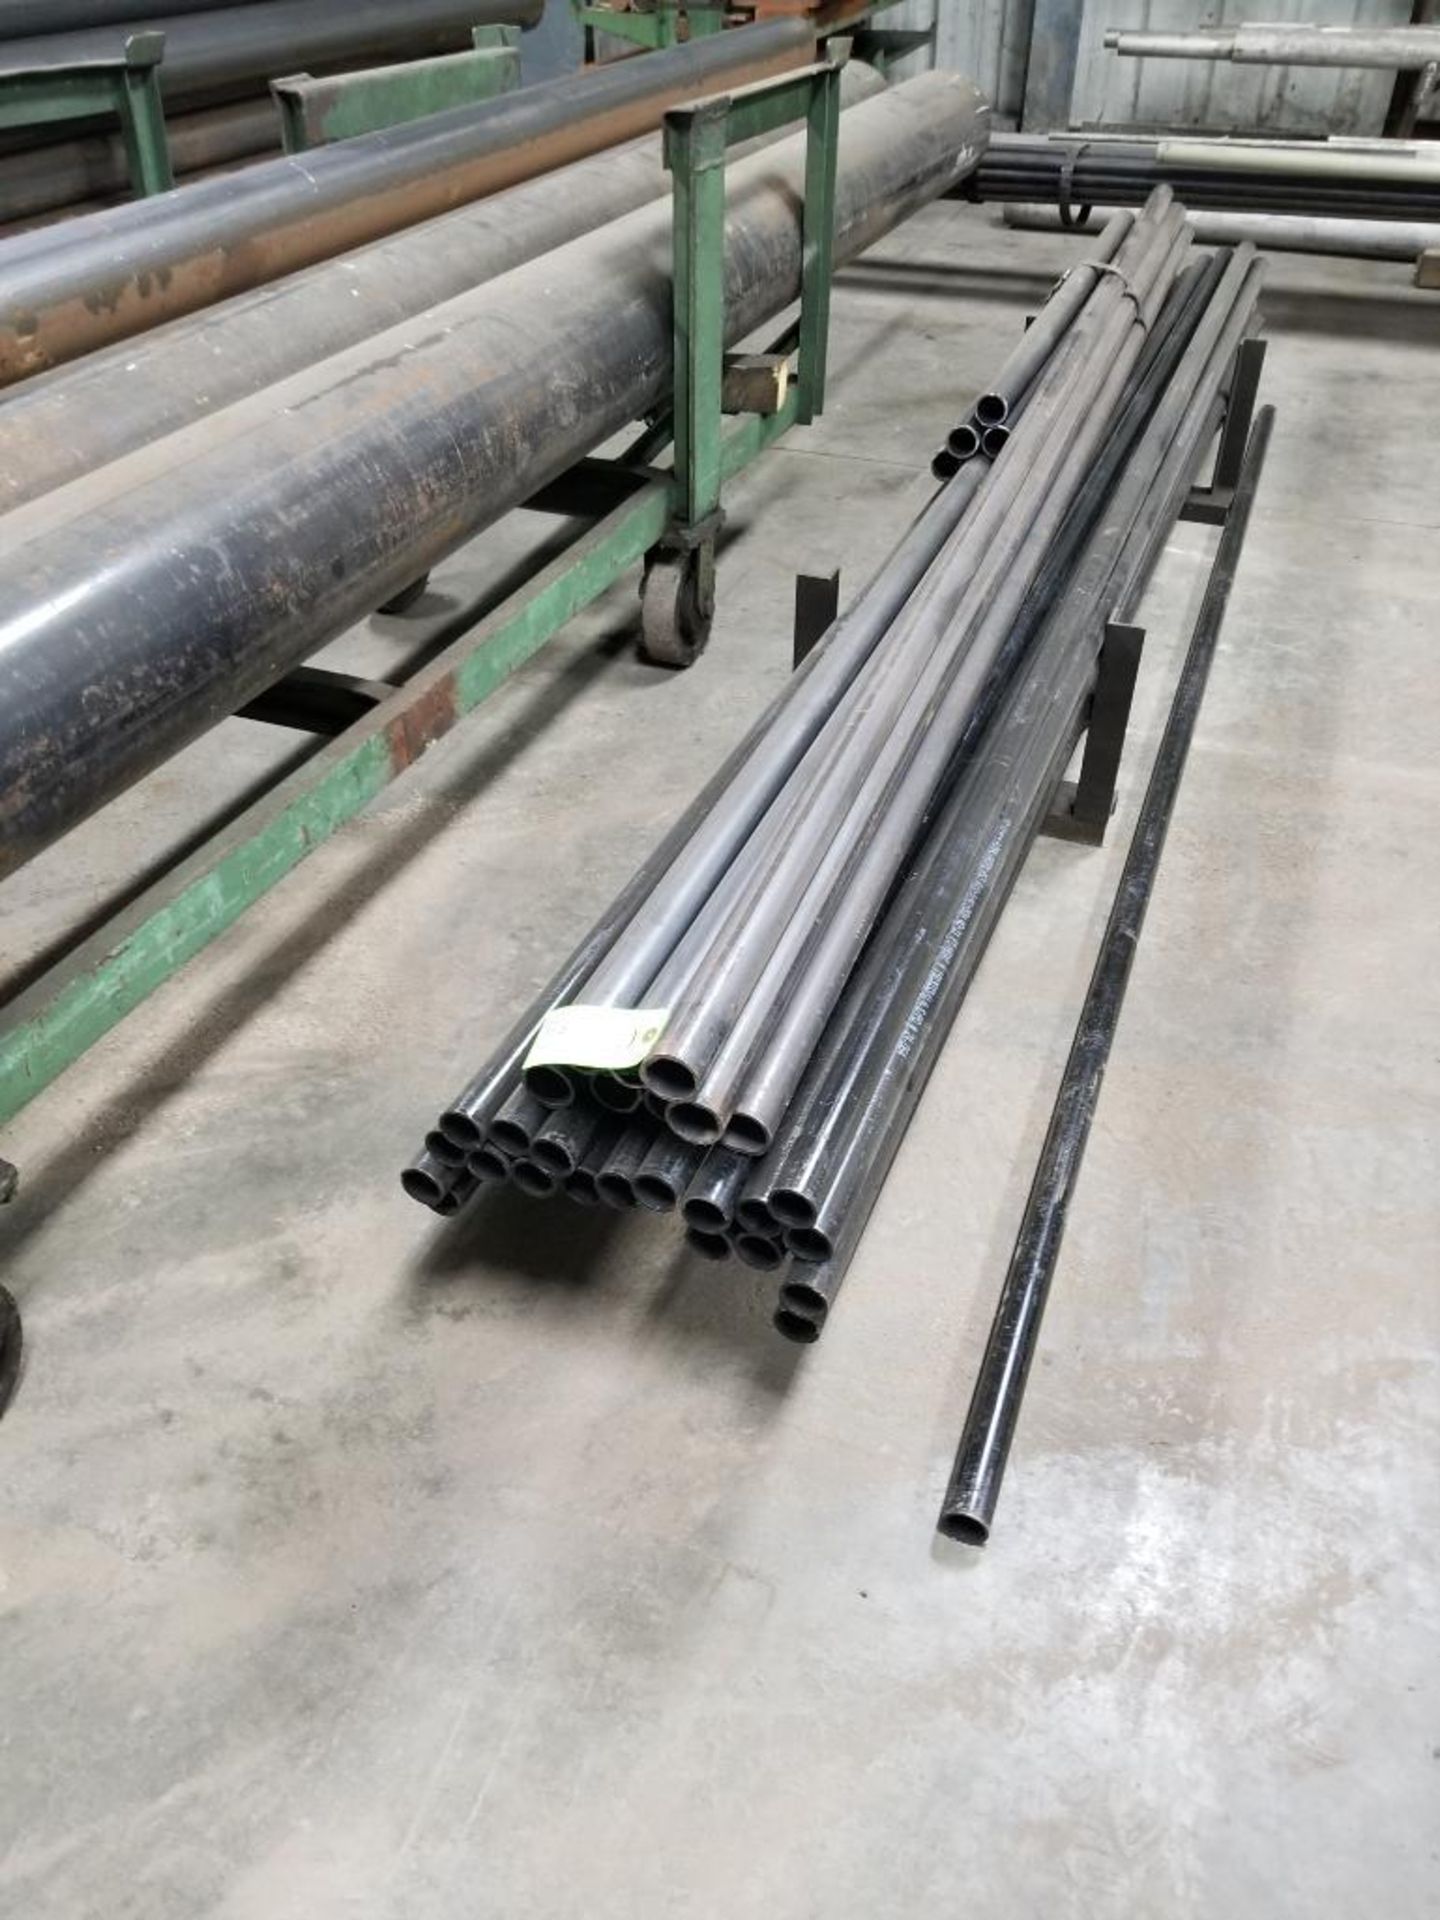 Large steel tubing in one section as pictured.